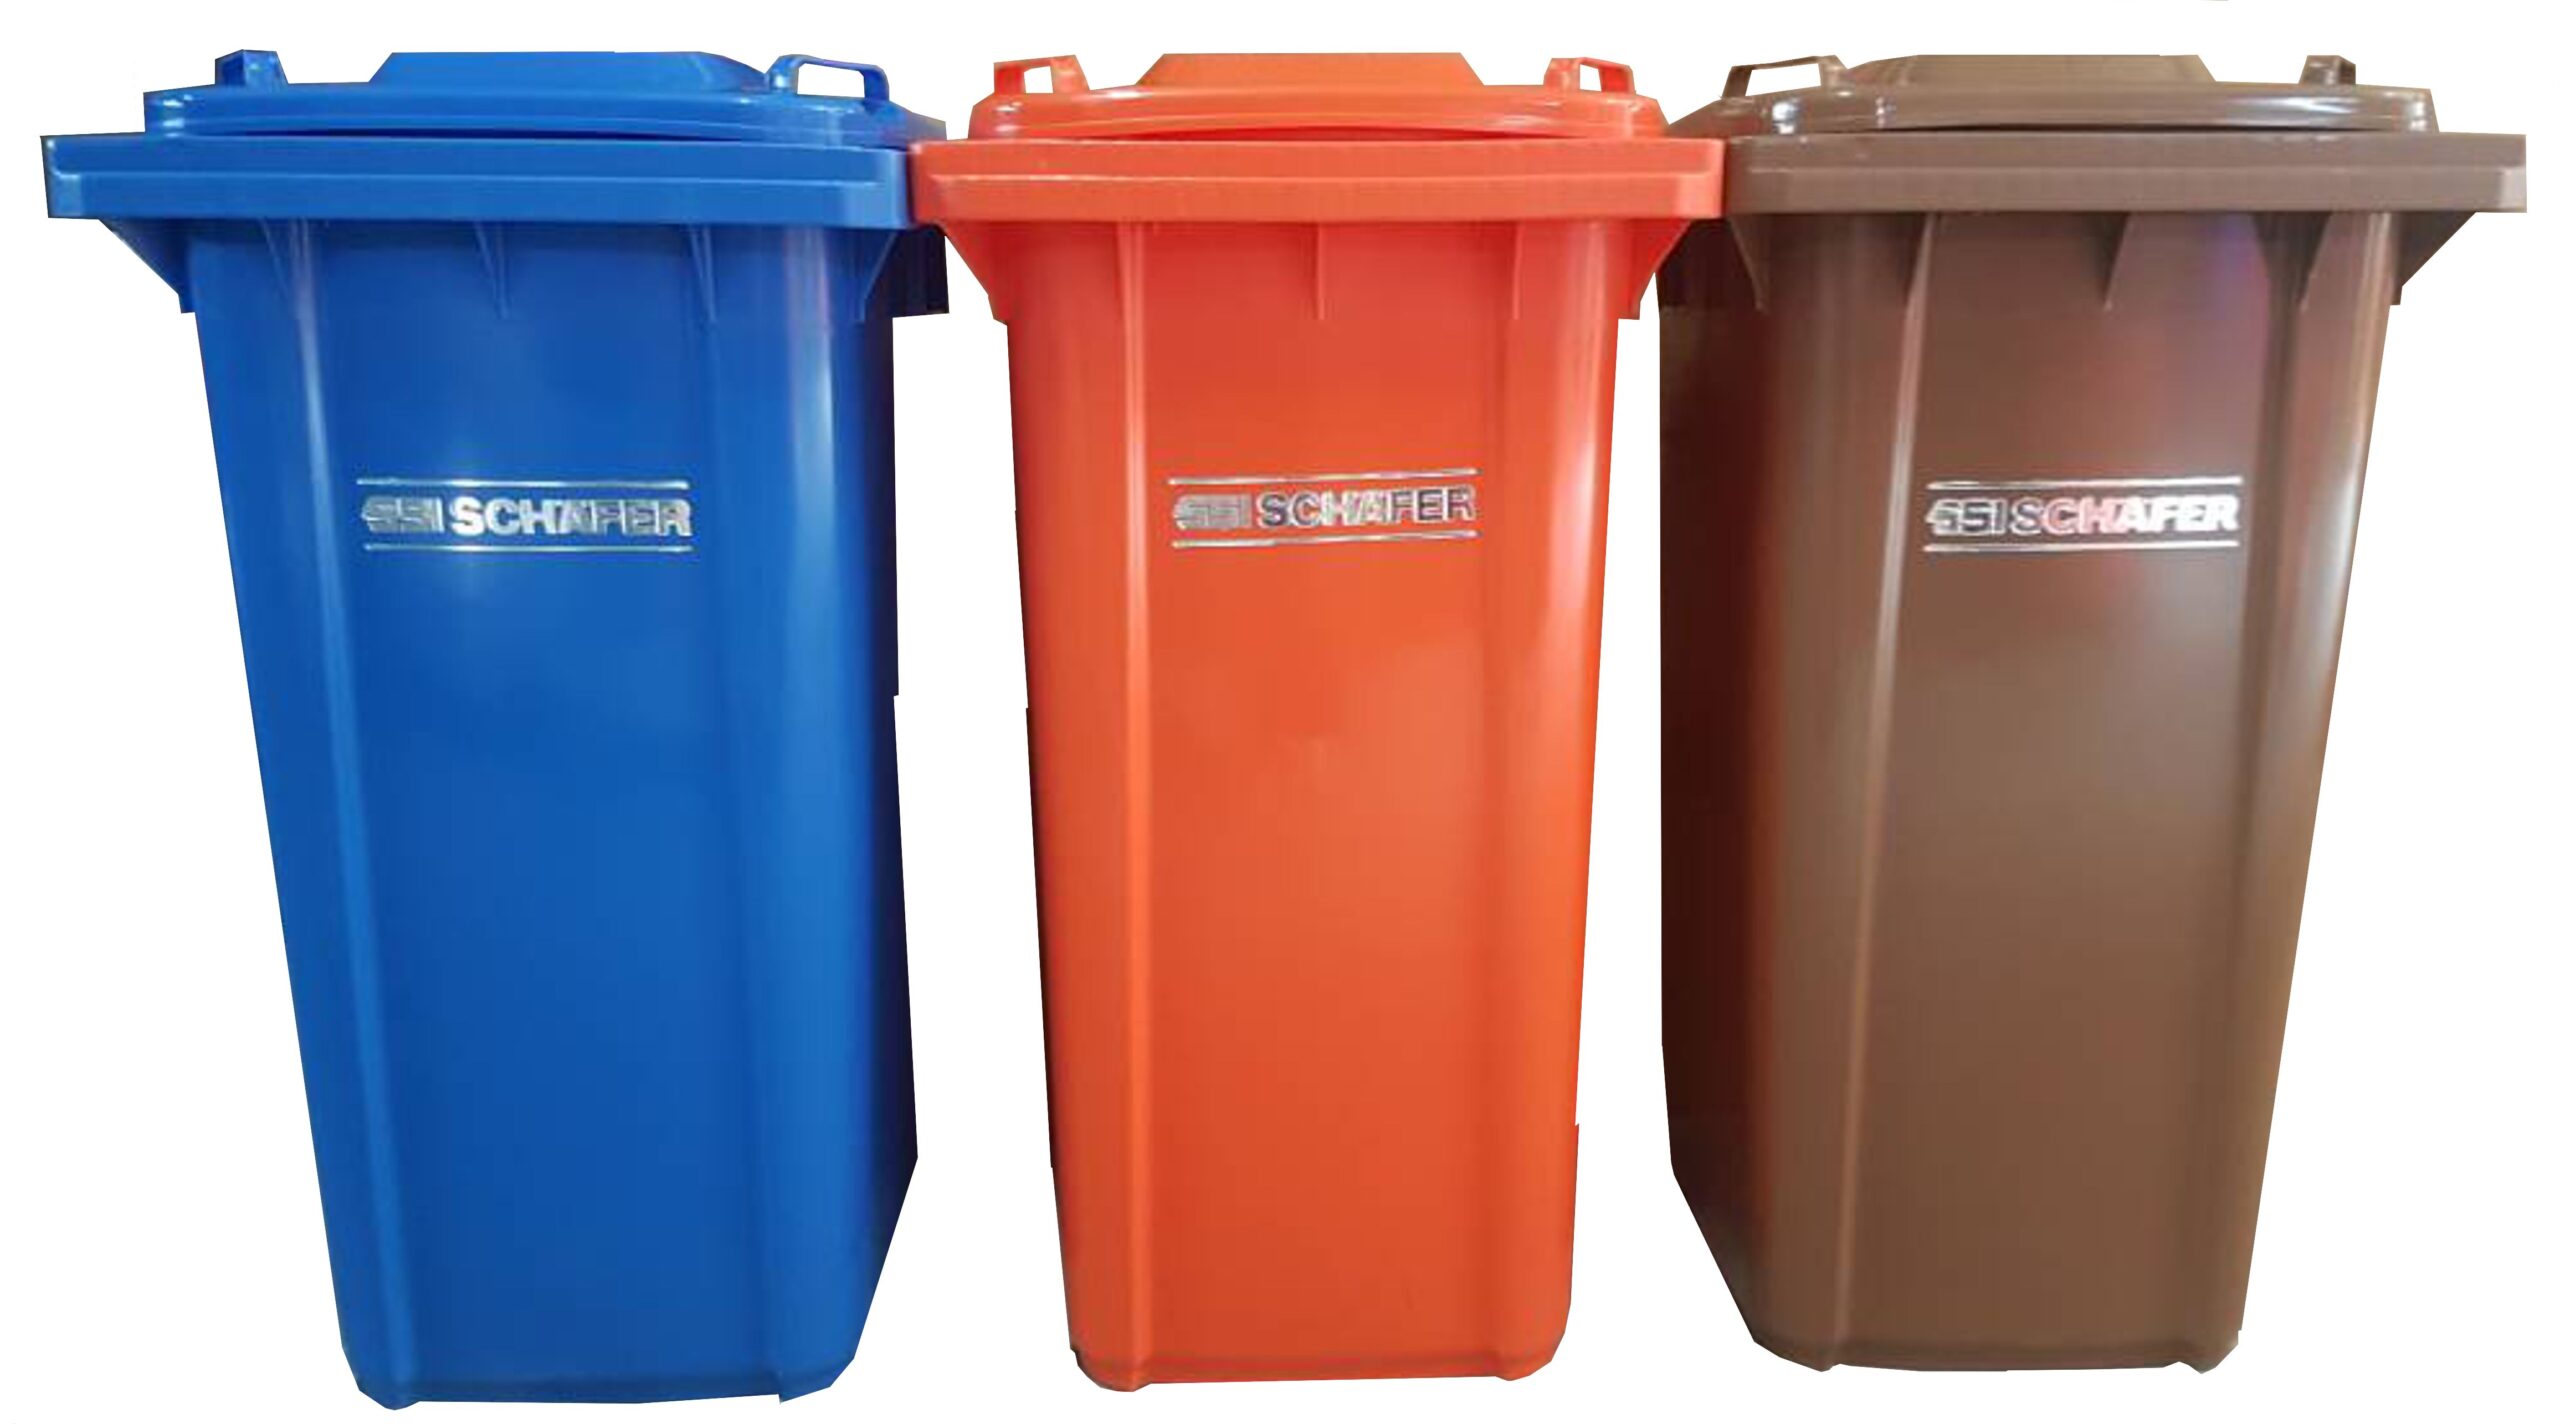 https://gs-systems.com.my/wp-content/uploads/2020/07/RECYCLE-BIN-scaled.jpg